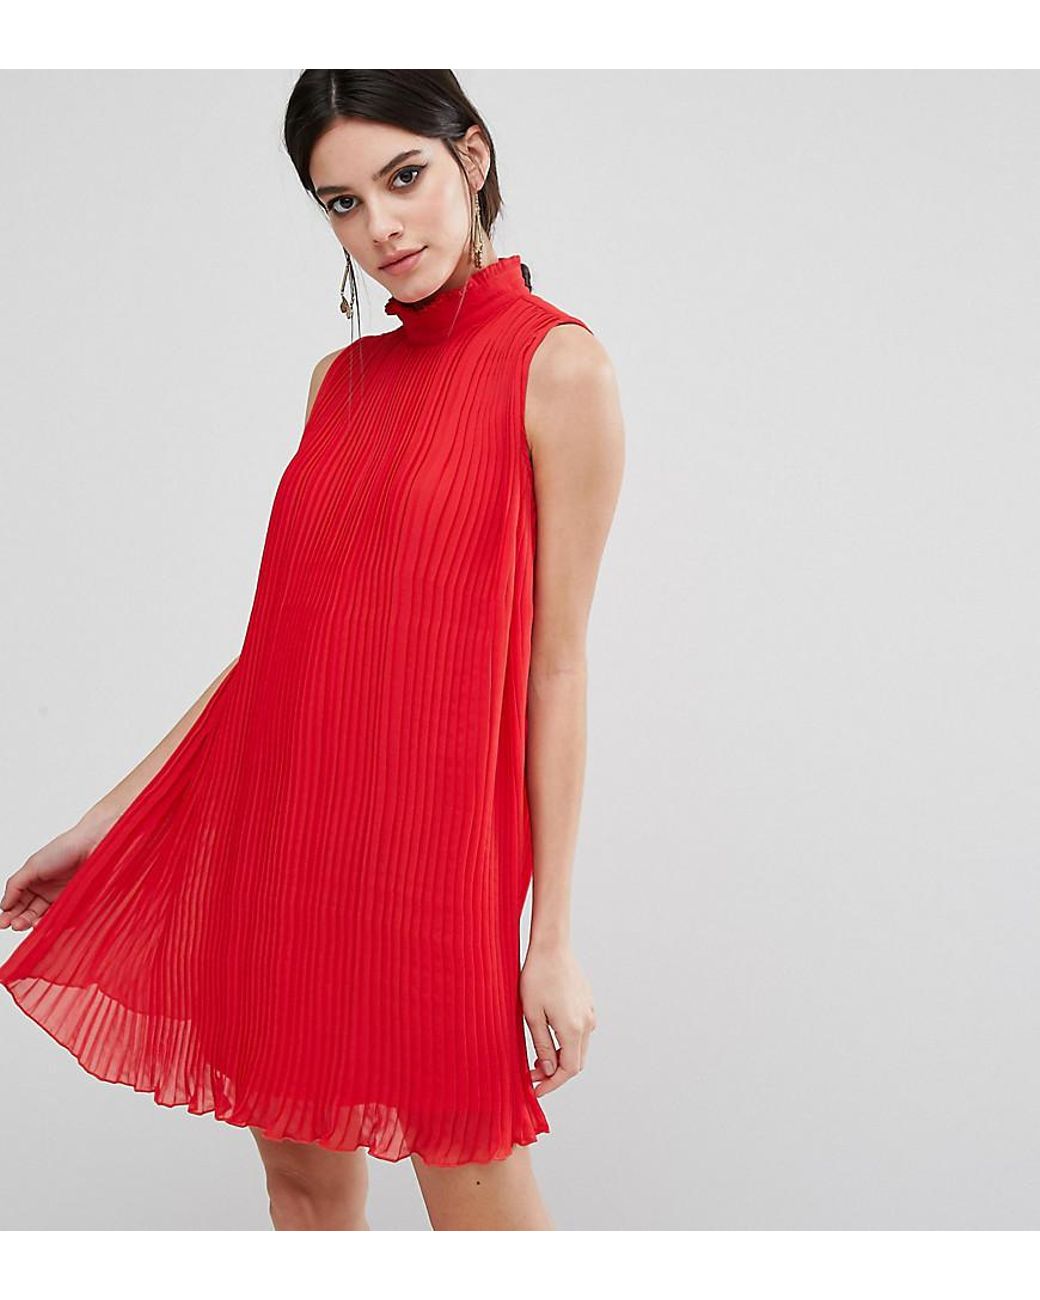 ASOS Sleeveless High Neck Pleated Swing Dress in Red | Lyst